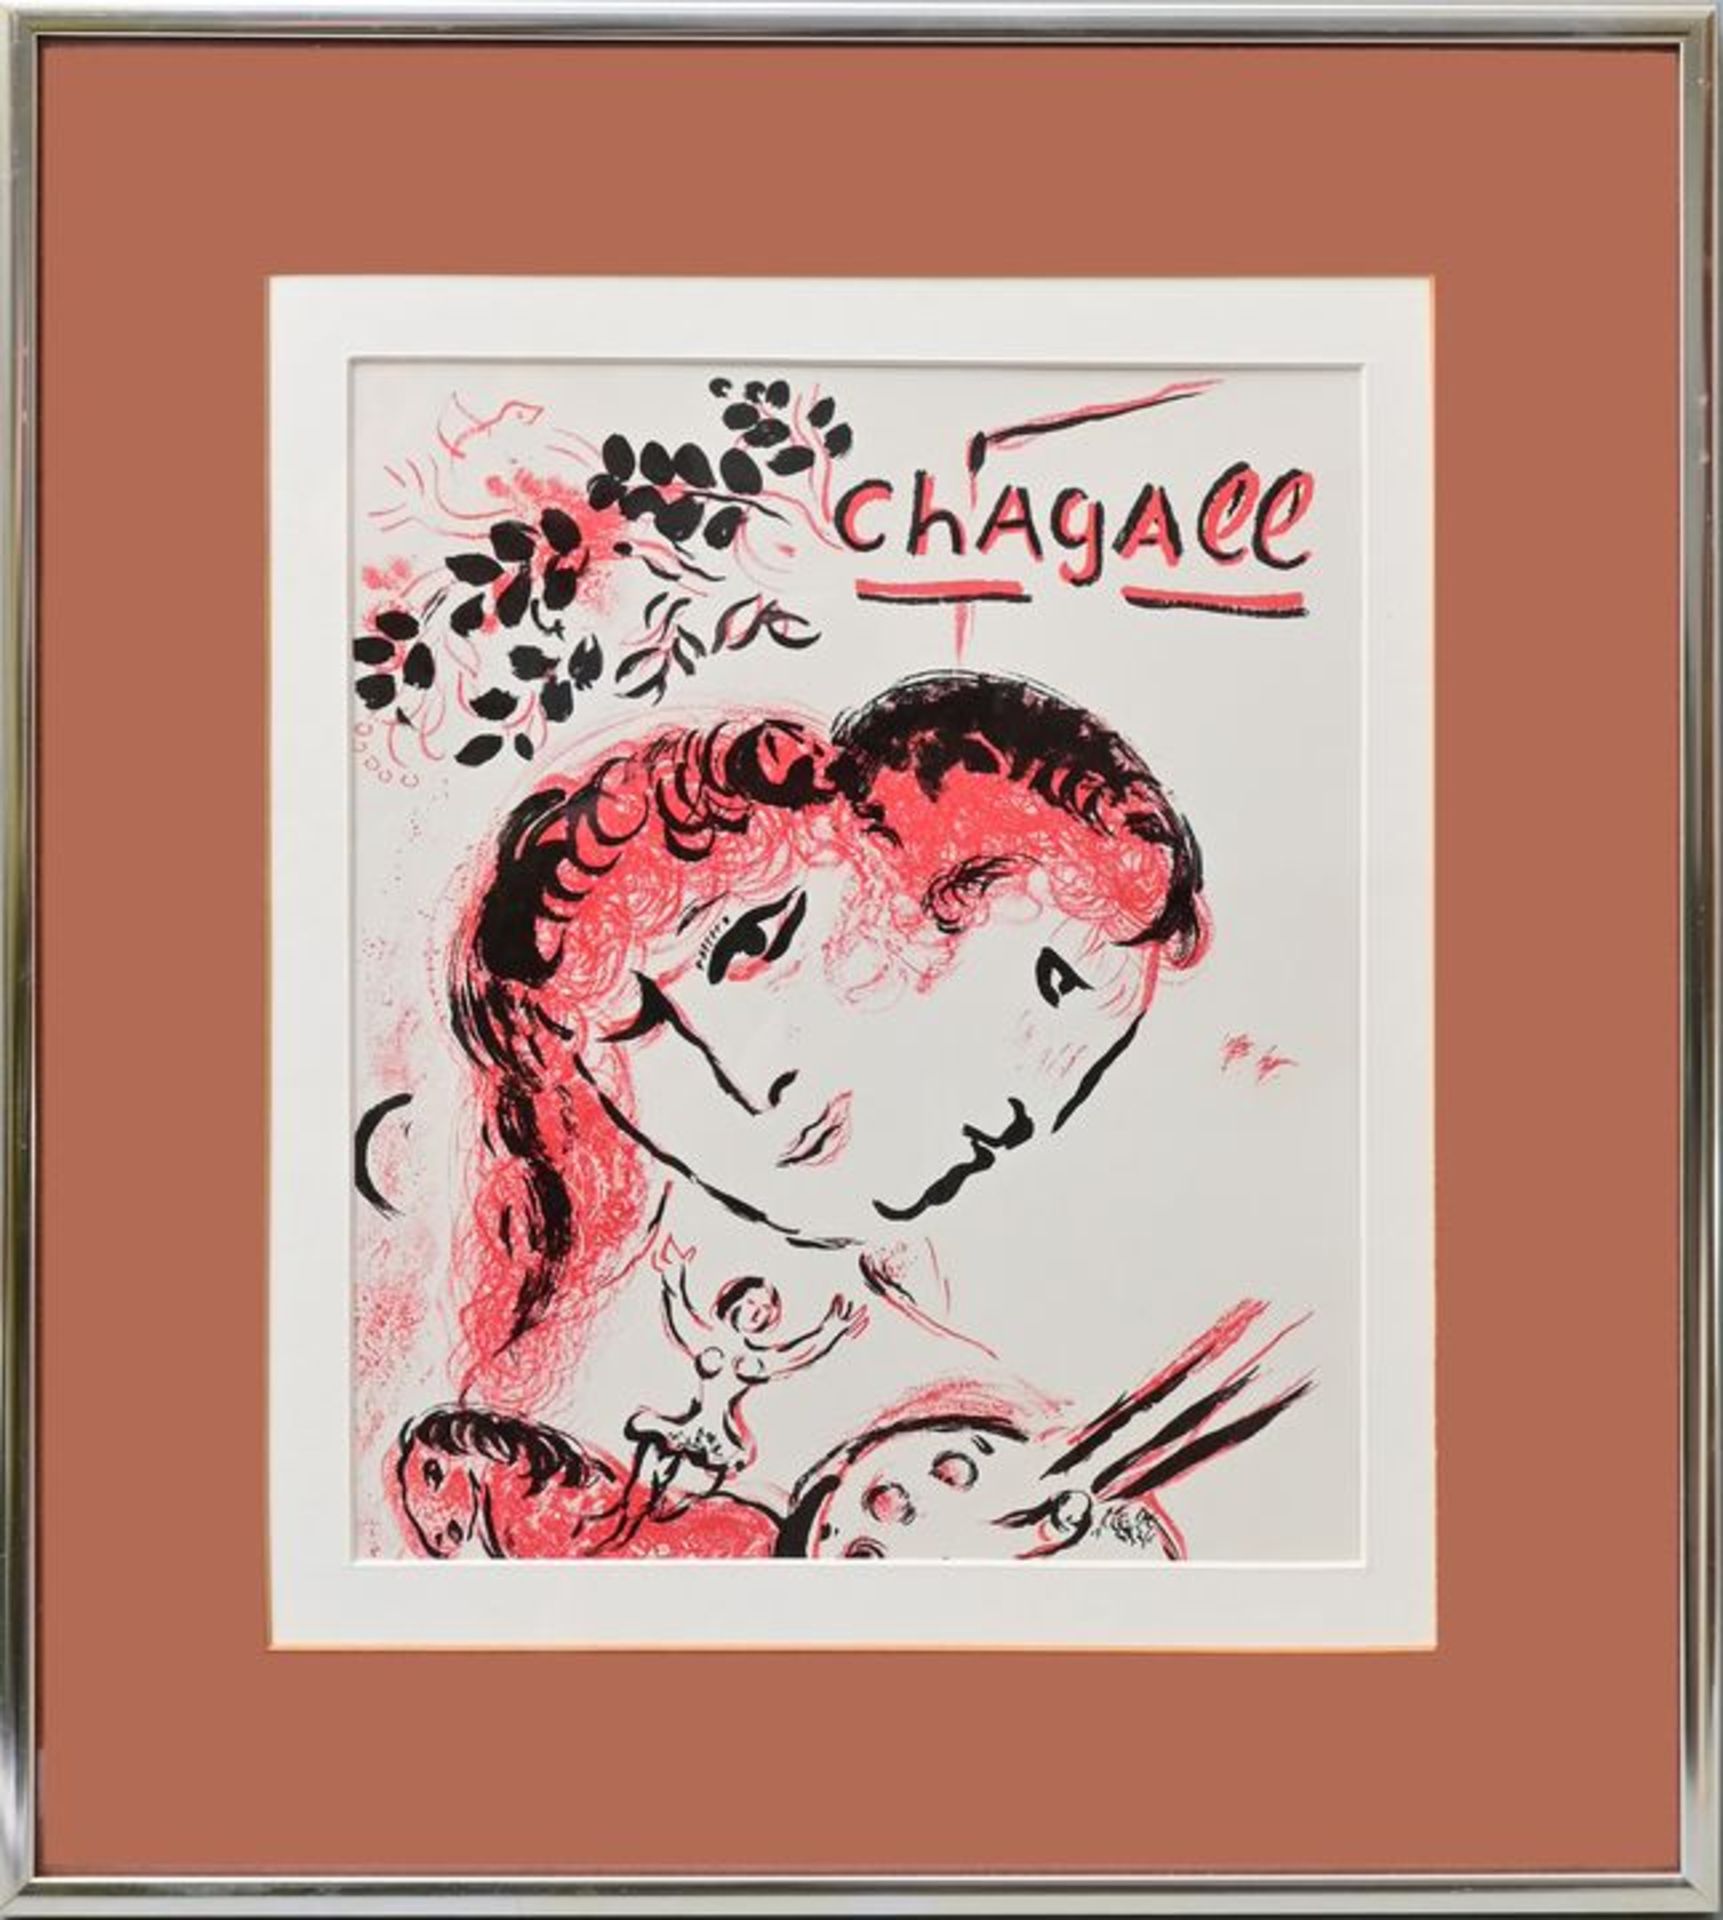 Chagall, Farblitho / Chagall, Colour lithograph - Image 3 of 3